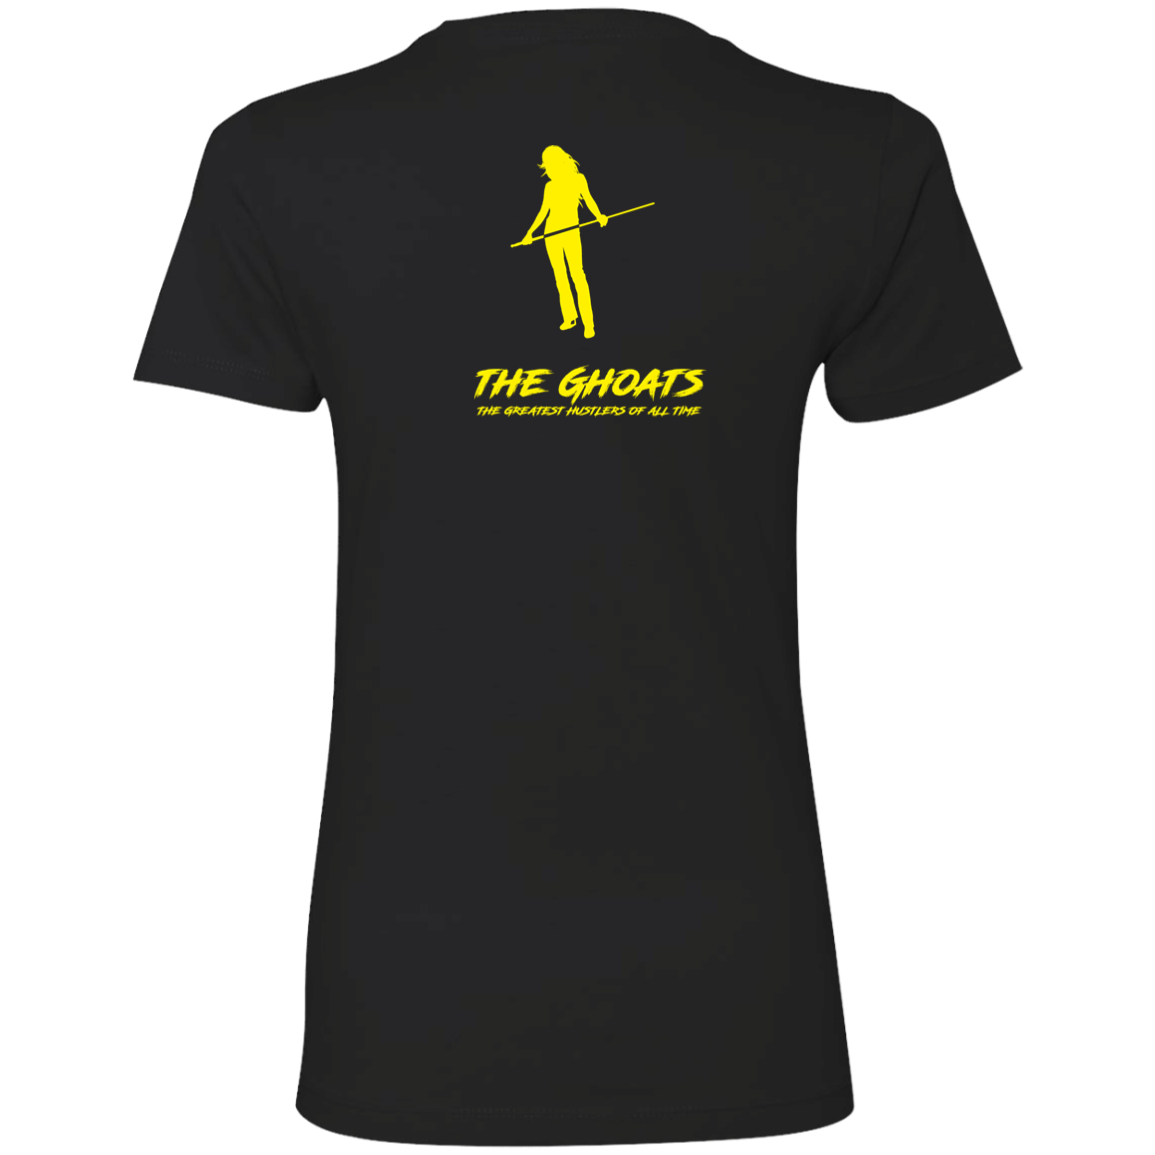 The GHOATS Custom Design. #34 Beware of Sharks. Play at Your Own Risk. (Ladies only version). Ladies' Boyfriend T-Shirt